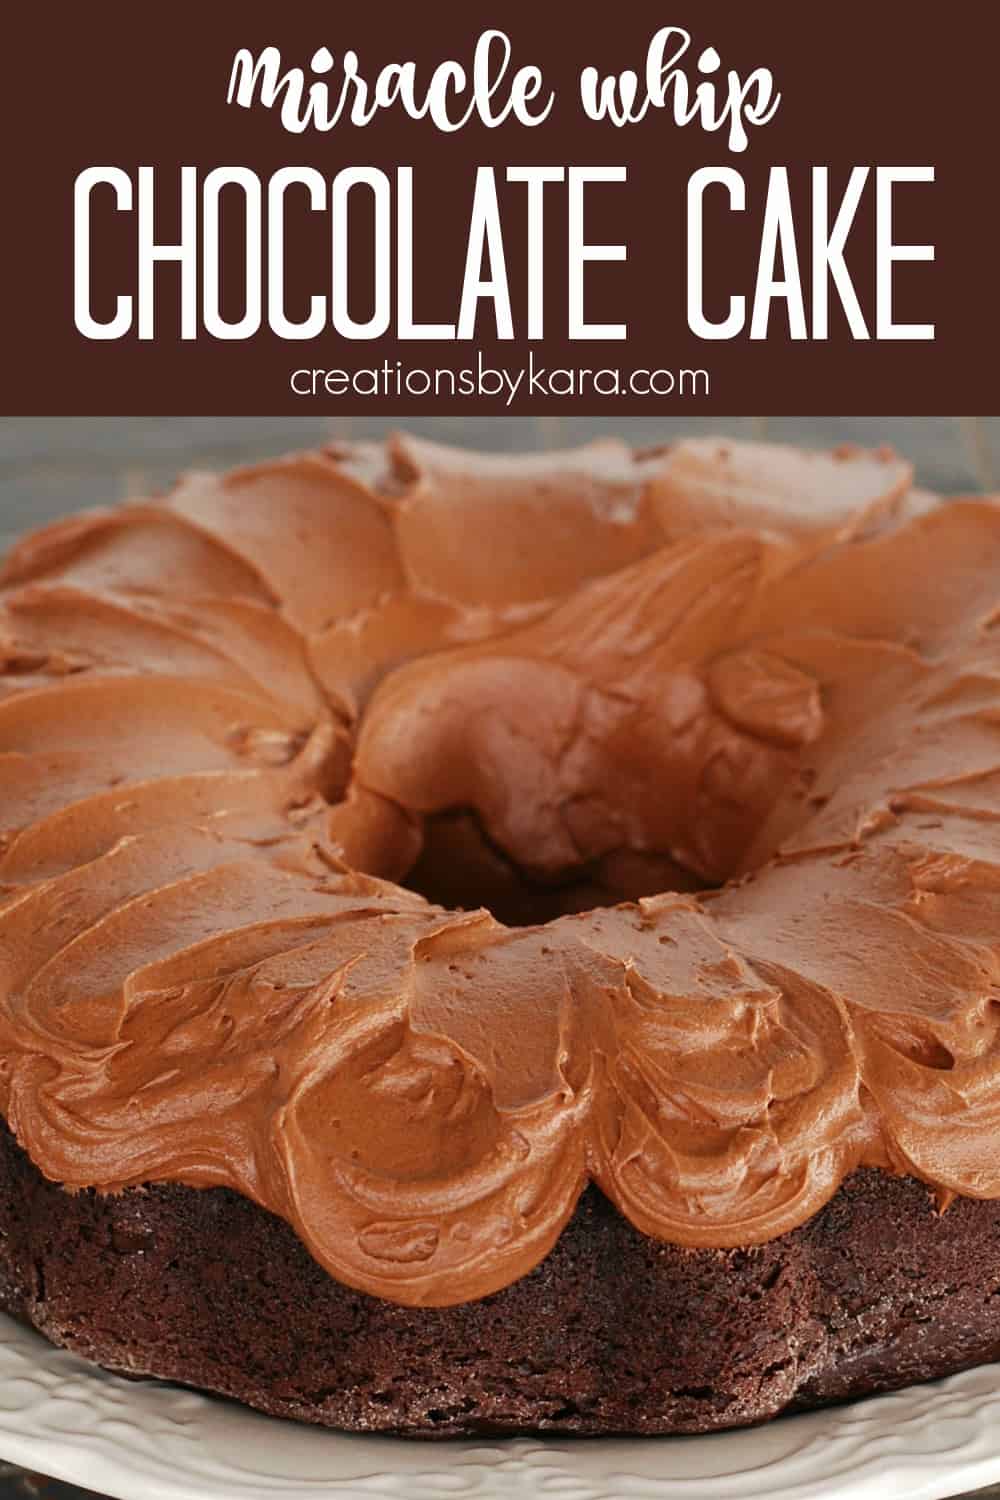 Miracle Whip Chocolate Cake from Scratch - Creations by Kara